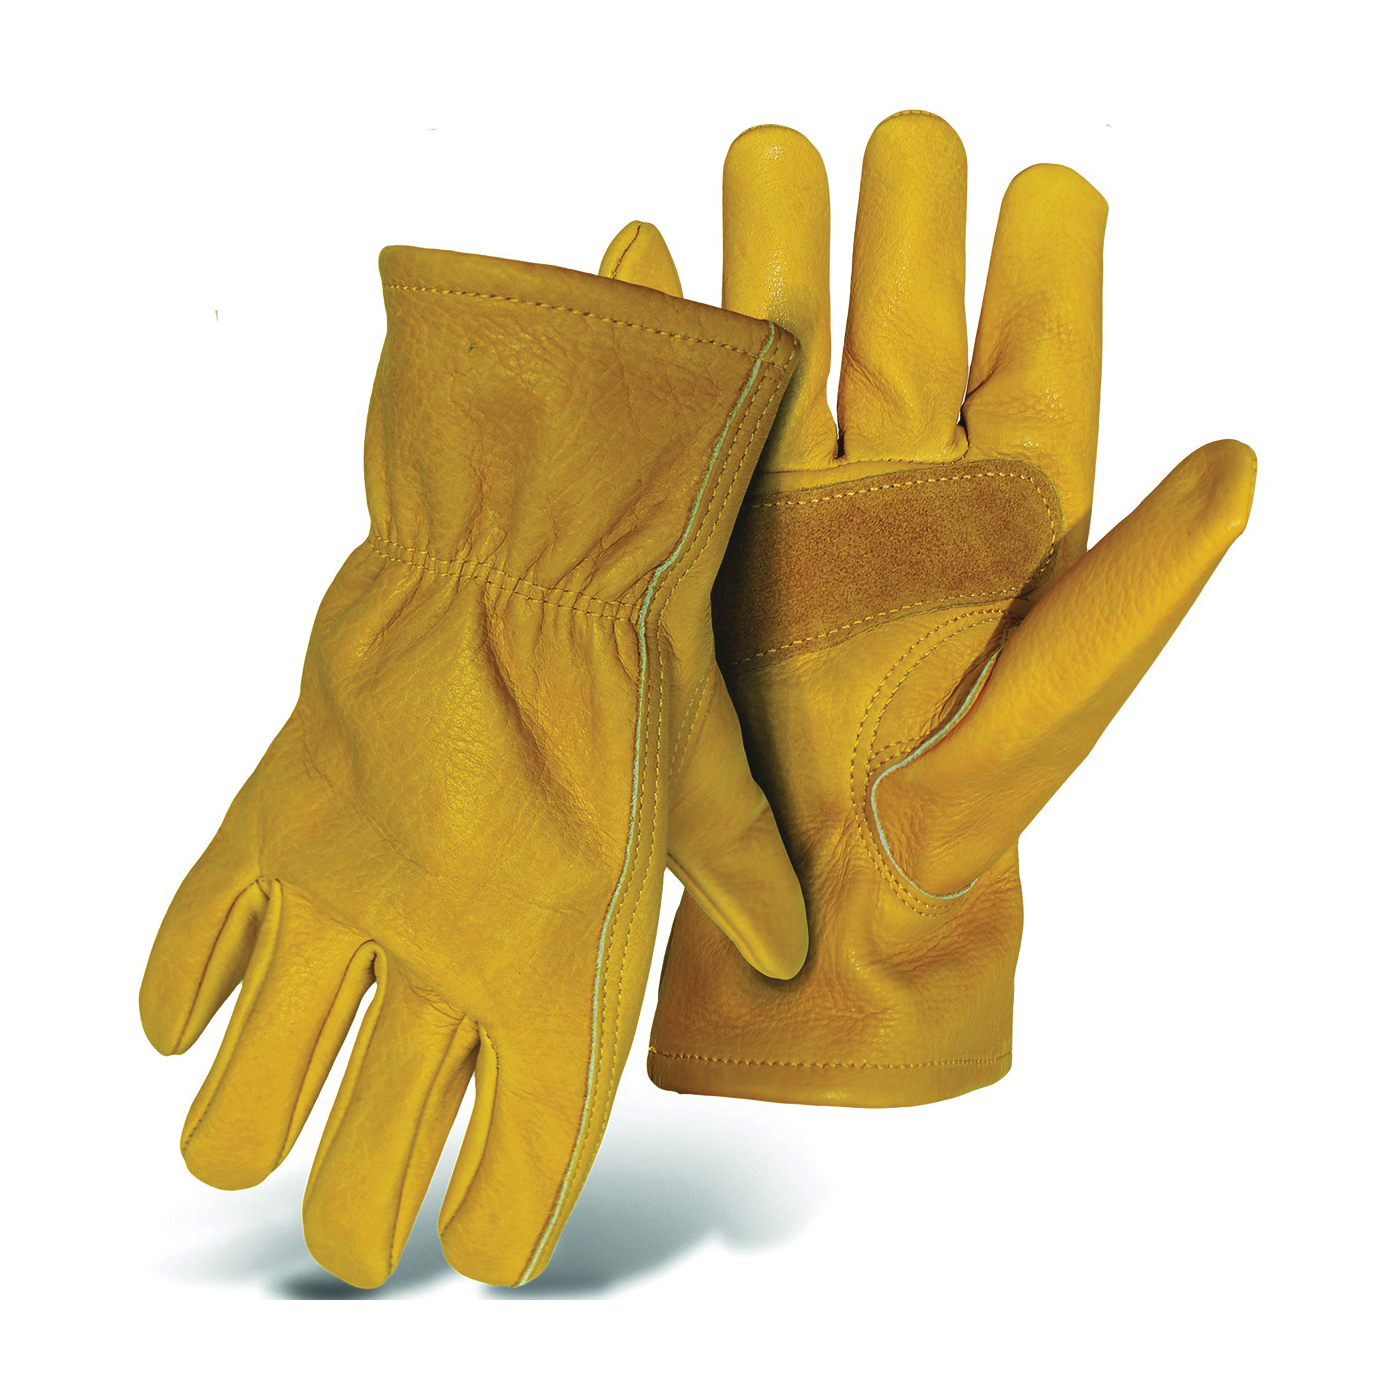 6039L Driver Gloves with Palm Patch, L, Keystone Thumb, Elastic Cuff, Cowhide Leather, Tan